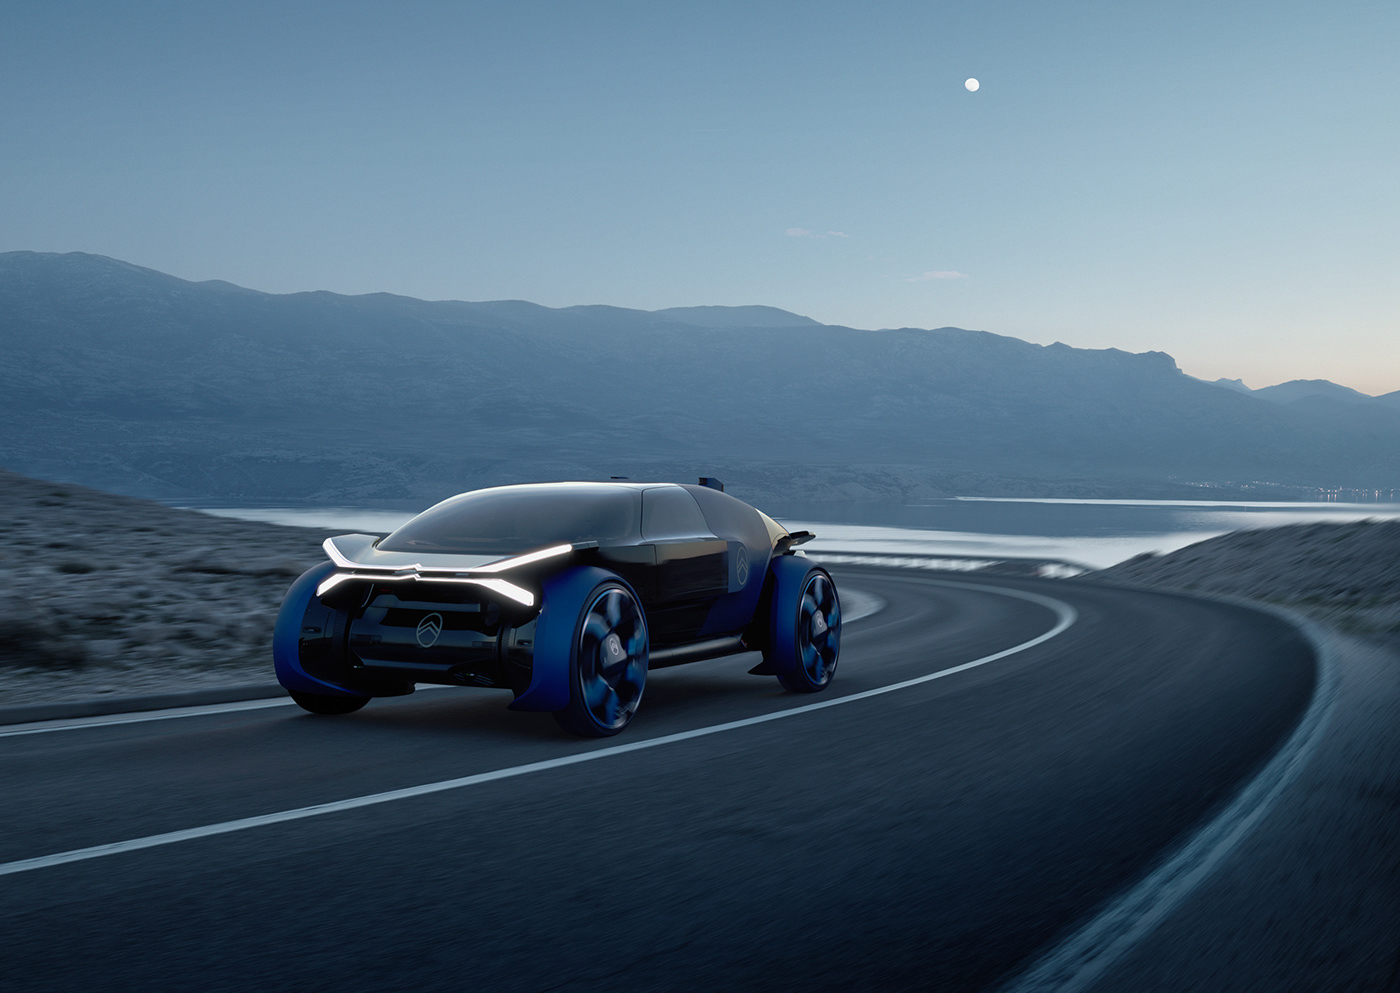 betc citroen concept car electric concept continental productions French car traction betc